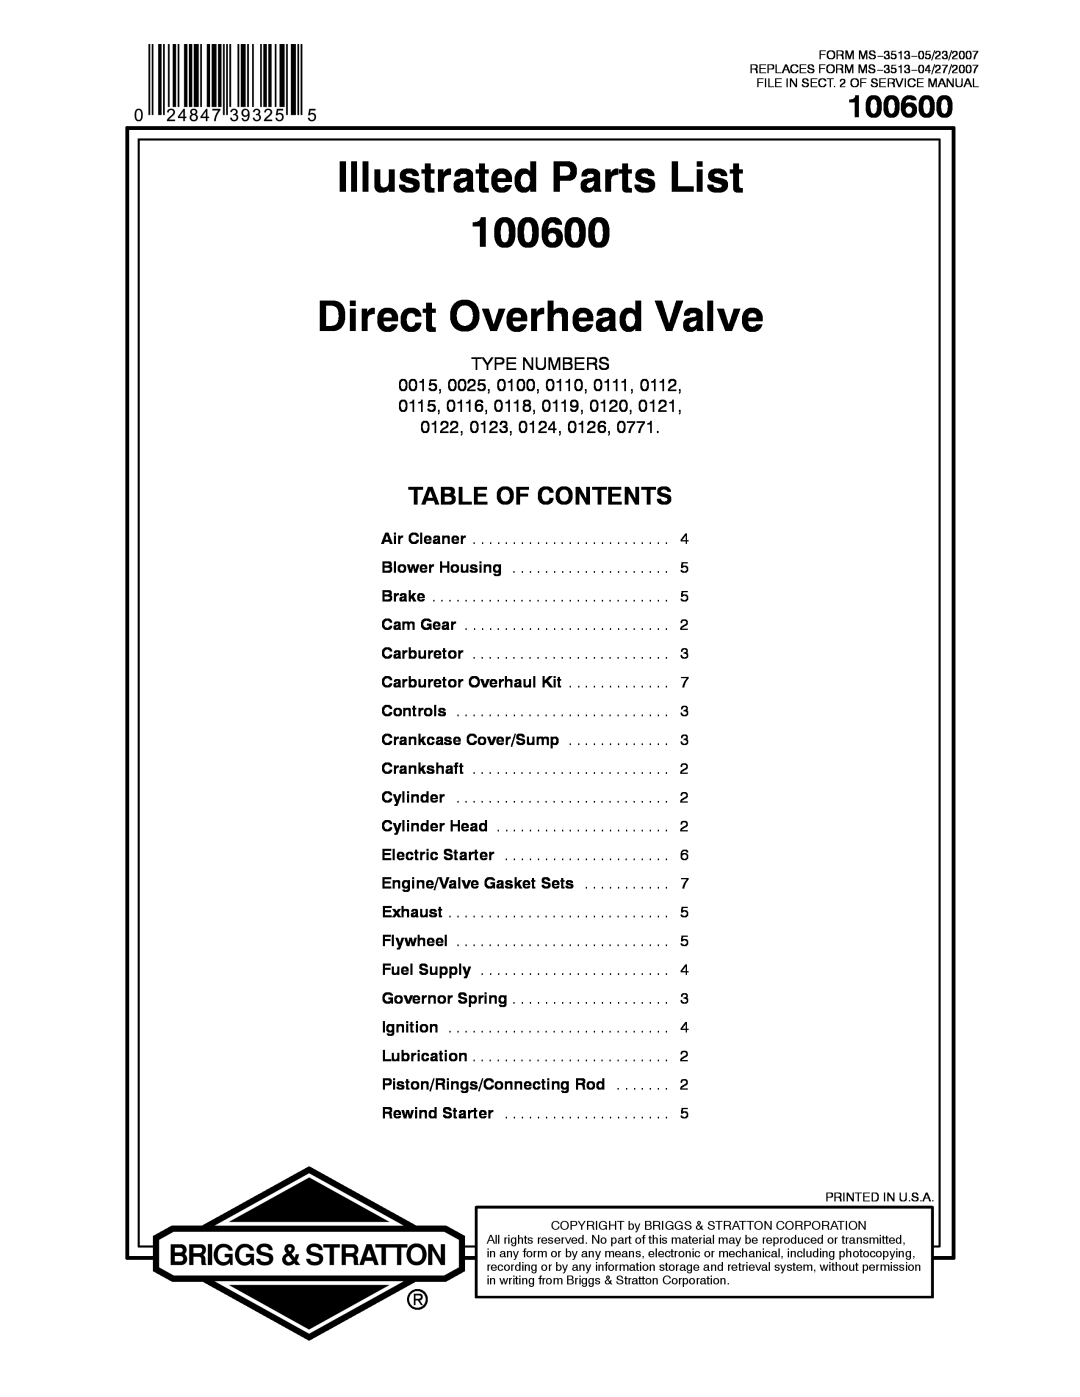 Briggs & Stratton 100600 service manual Illustrated Parts List, Direct Overhead Valve, Table Of Contents, Type Numbers 